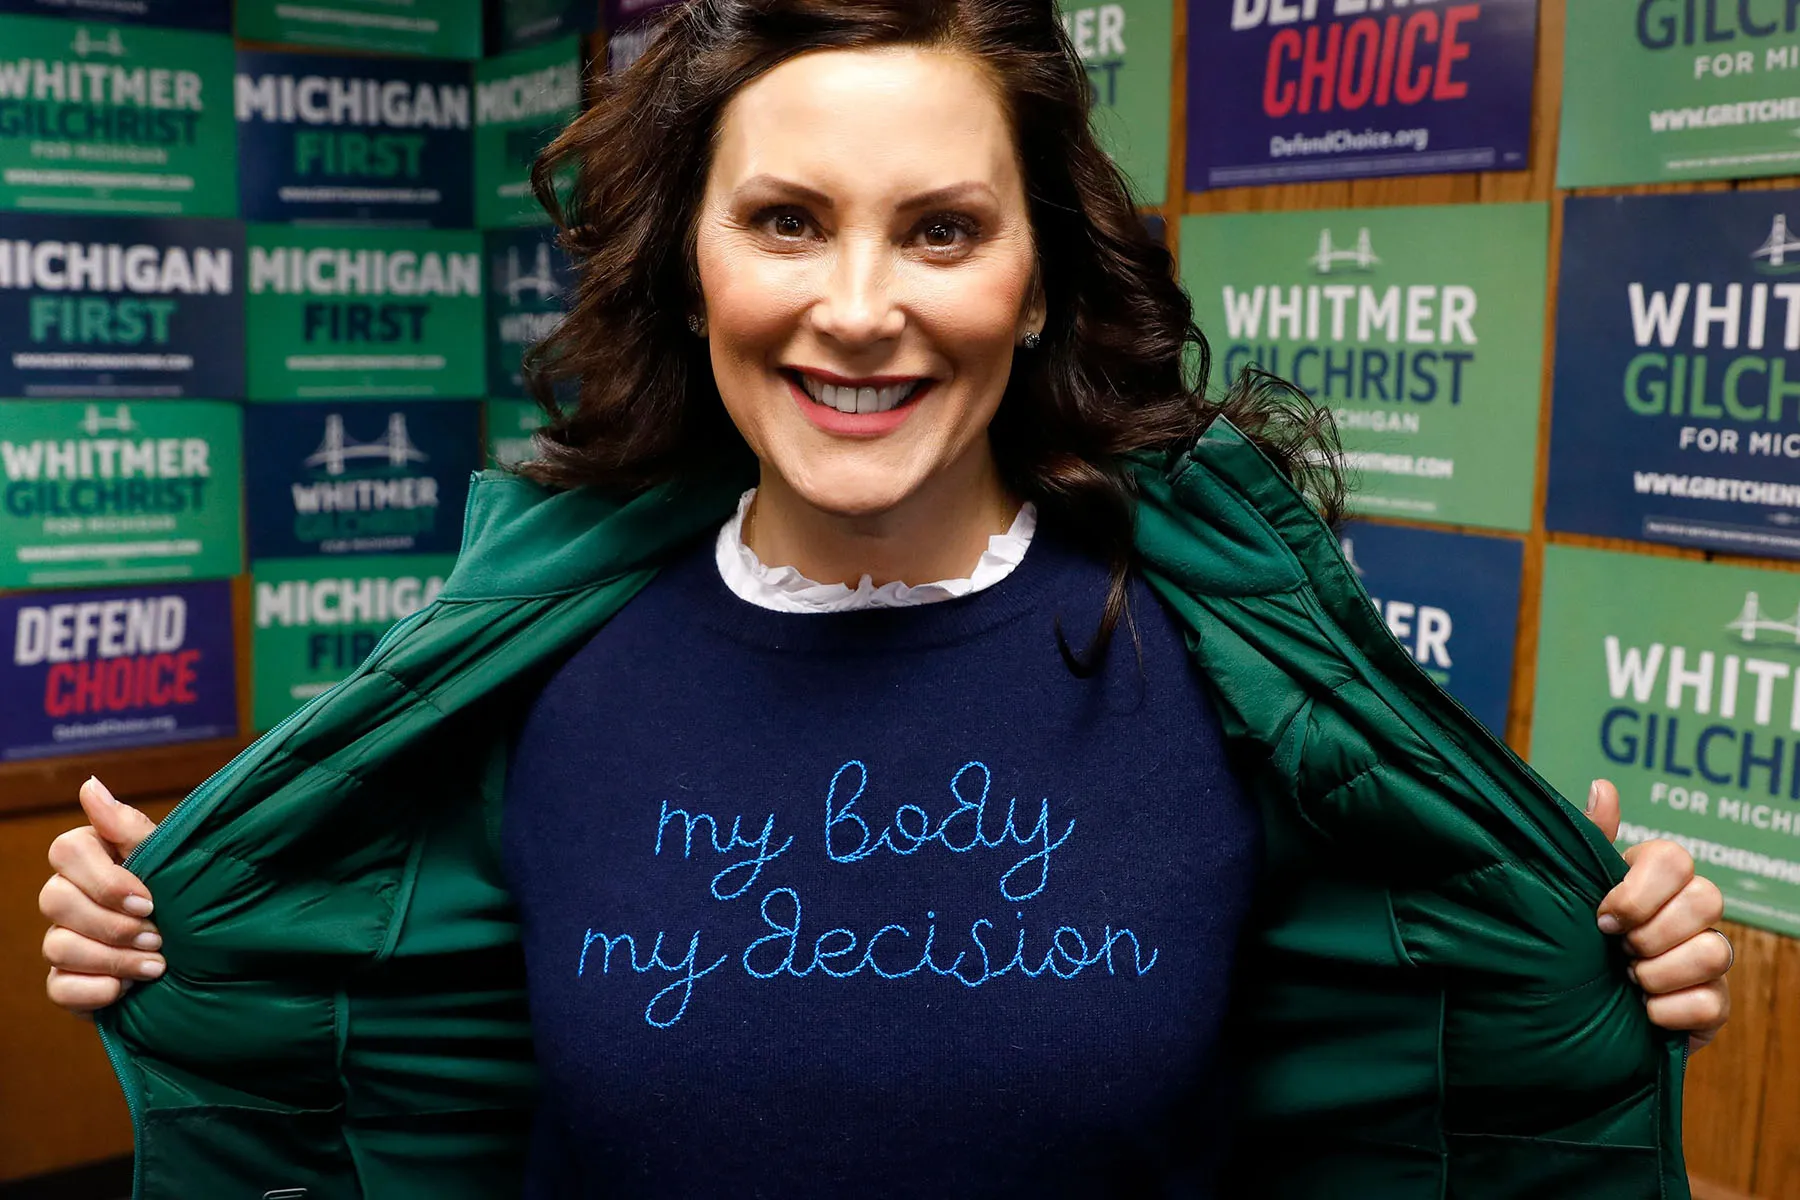 Michigan Gov. Gretchen Whitmer shows off her "My Body My Decision" shirt as she poses for a portrait.